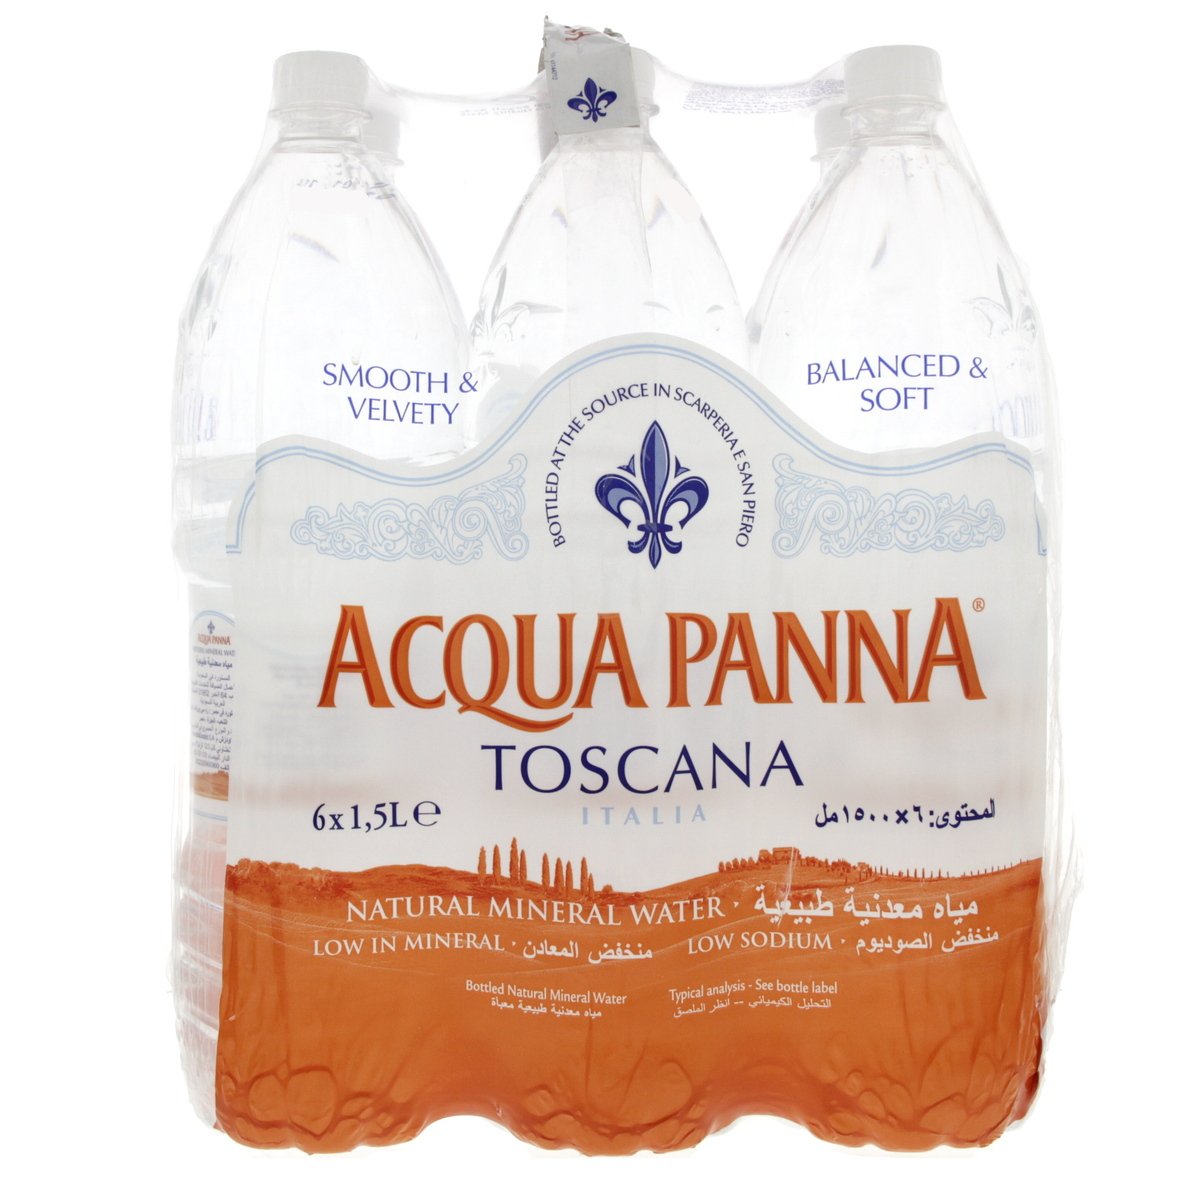 Buy Acqua Panna Toscana Bottled Natural Mineral Water 1.5 Litres Online at Best Price | Mineral/Spring water | Lulu Kuwait in Kuwait